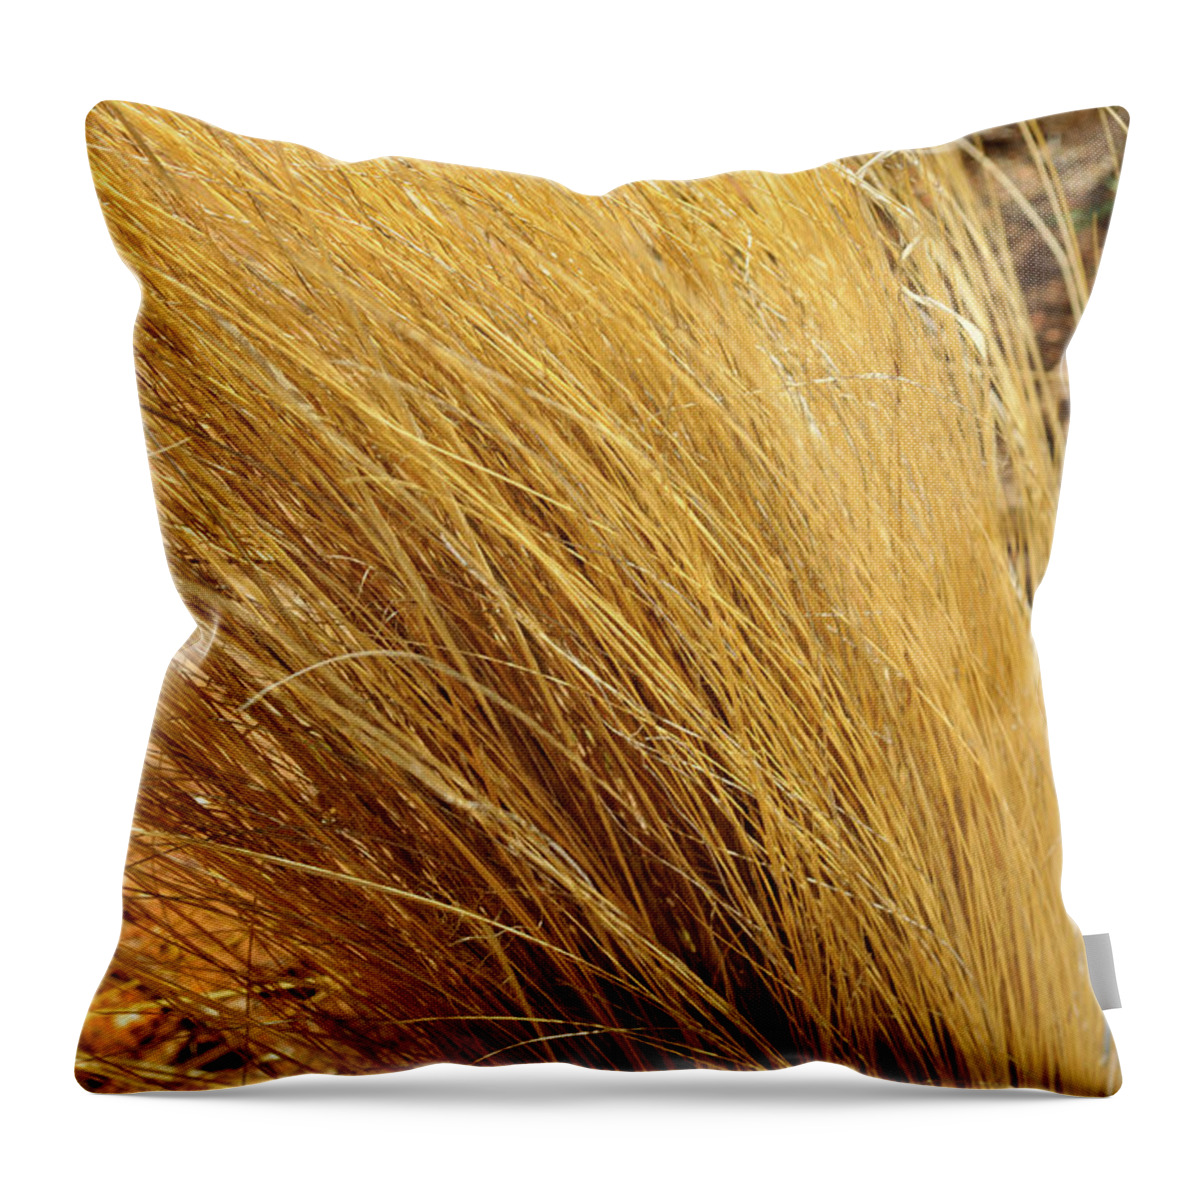 Landscape Throw Pillow featuring the photograph Dried Grass by Ron Cline